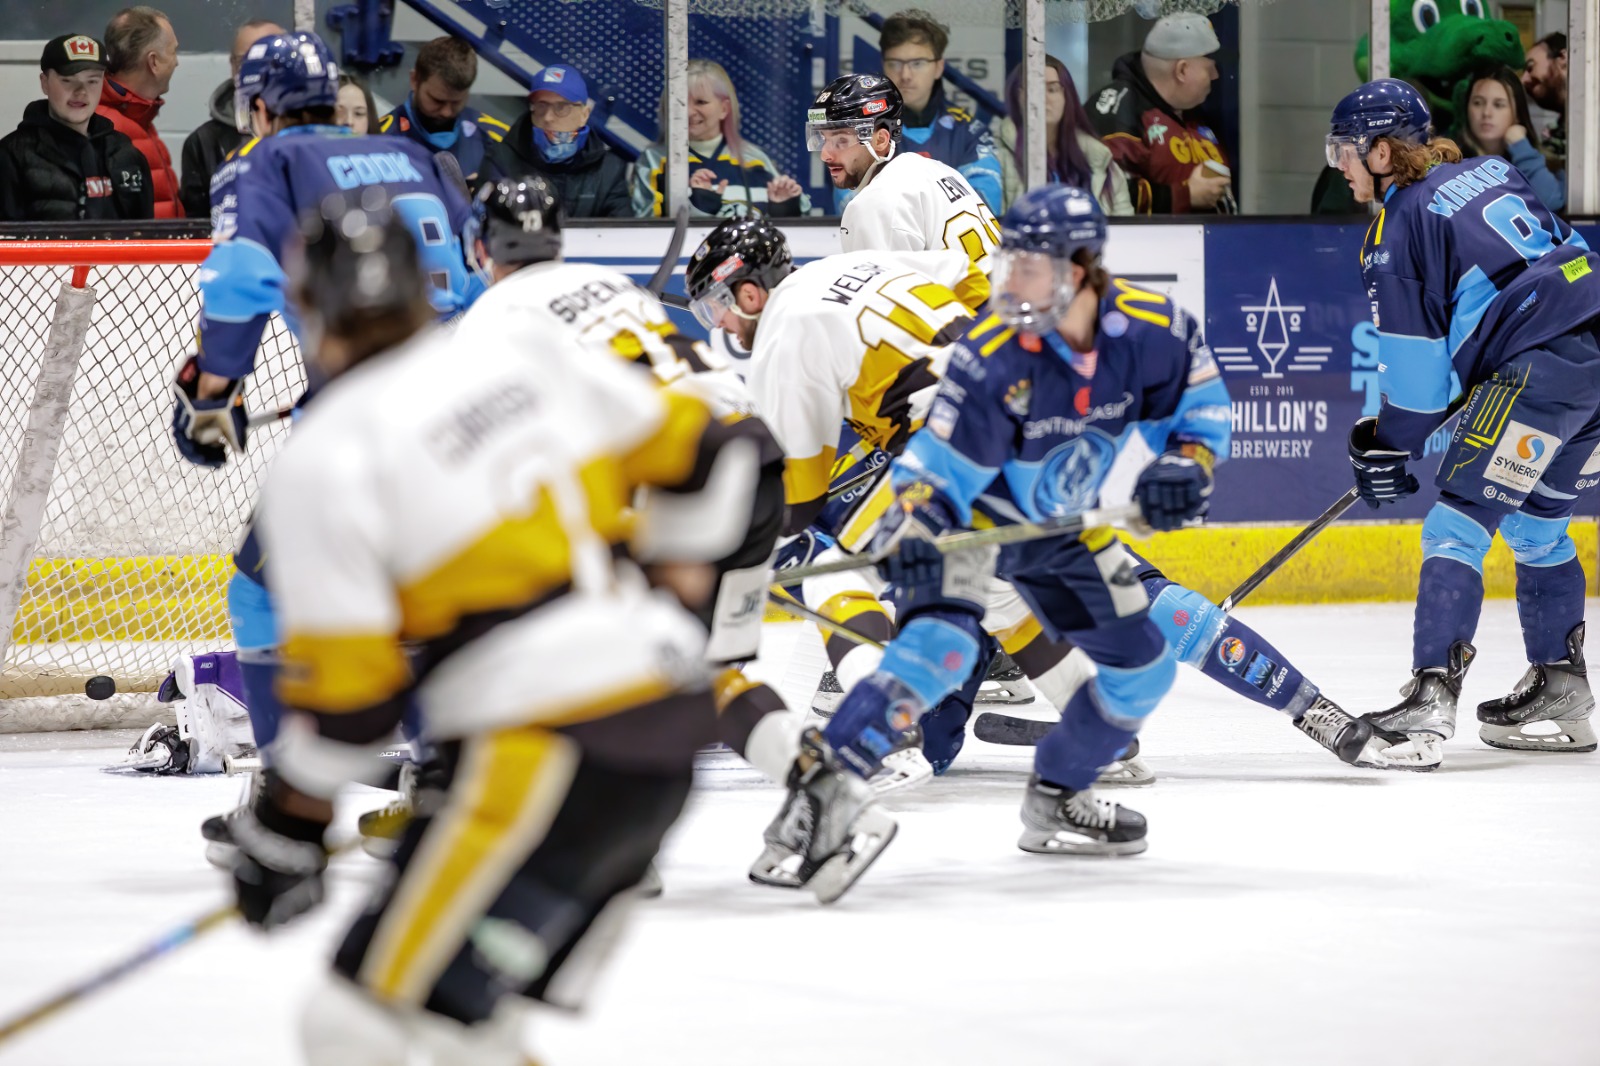 MATCH REPORT: COVENTRY 7-4 PANTHERS Top Image